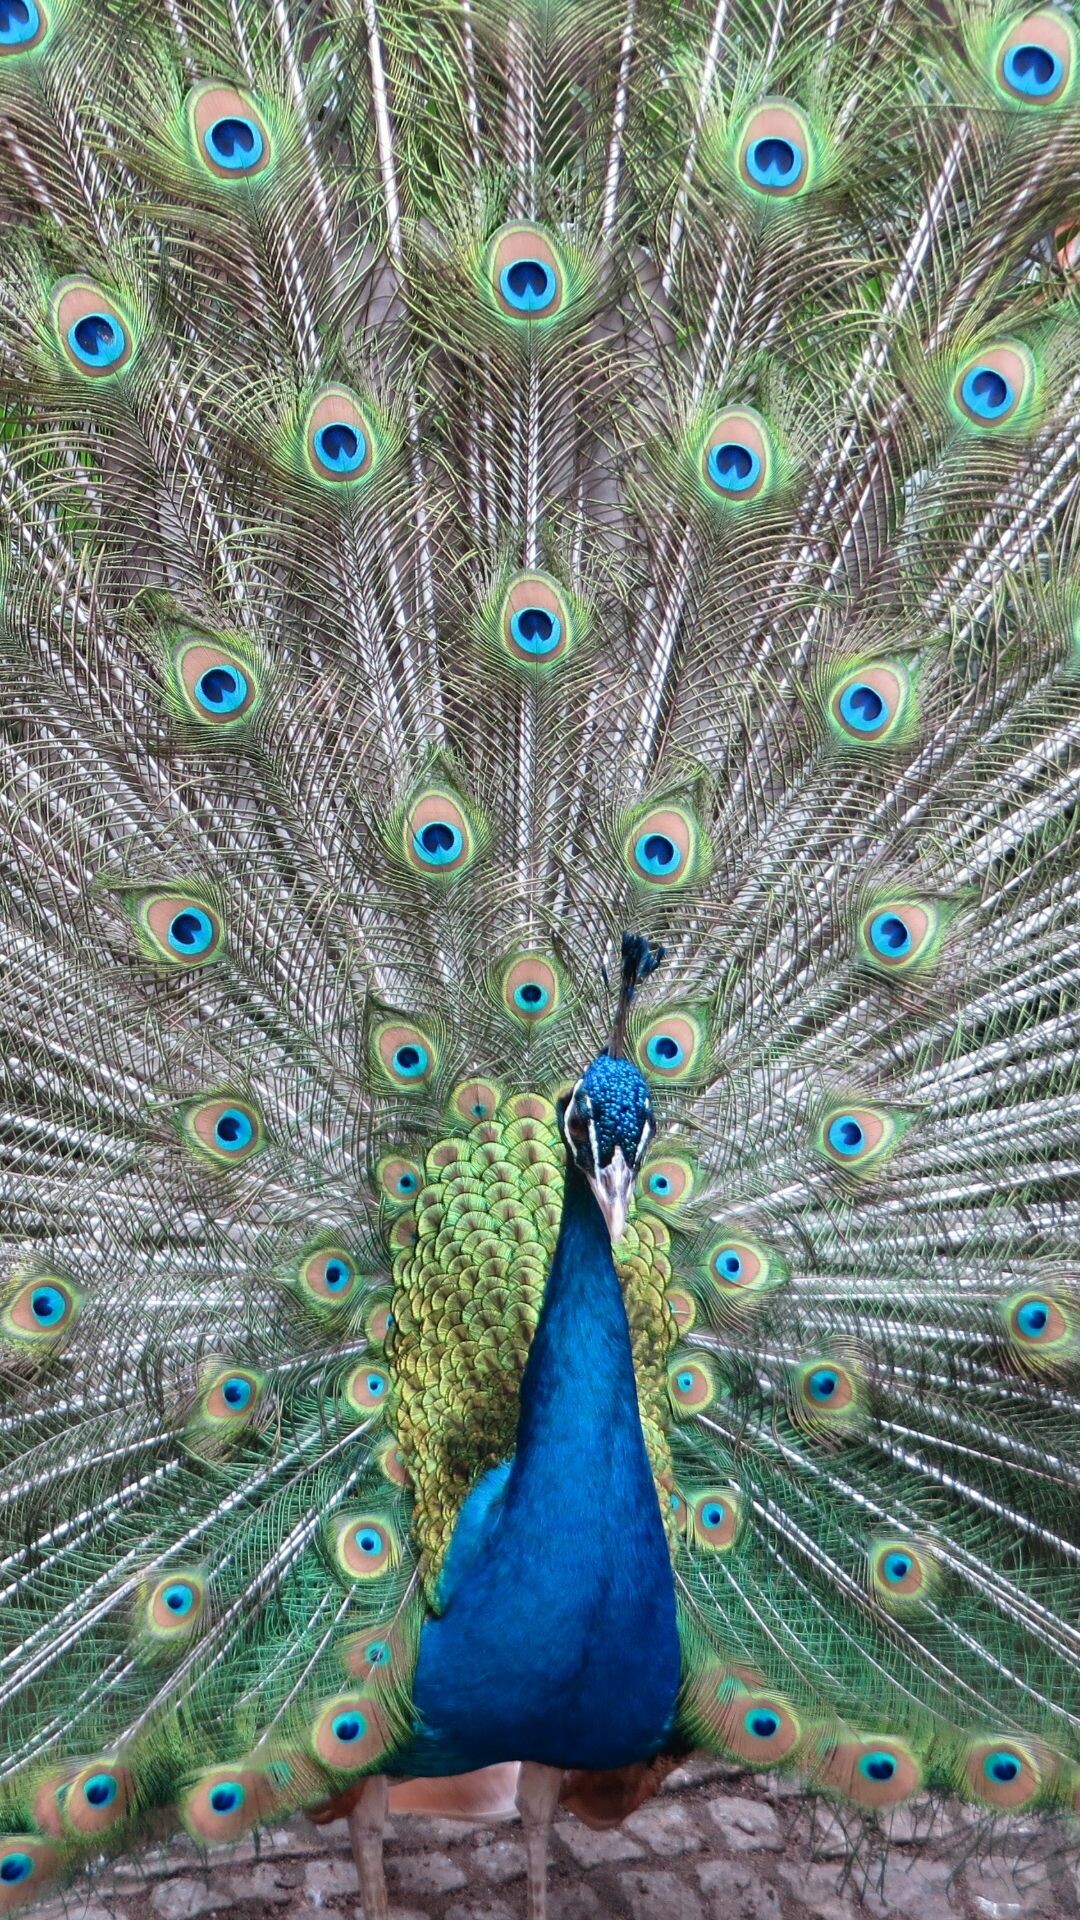 Peacock: The Indian Peafowl has very flashy plumage, with a bright blue head and neck. 1080x1920 Full HD Wallpaper.